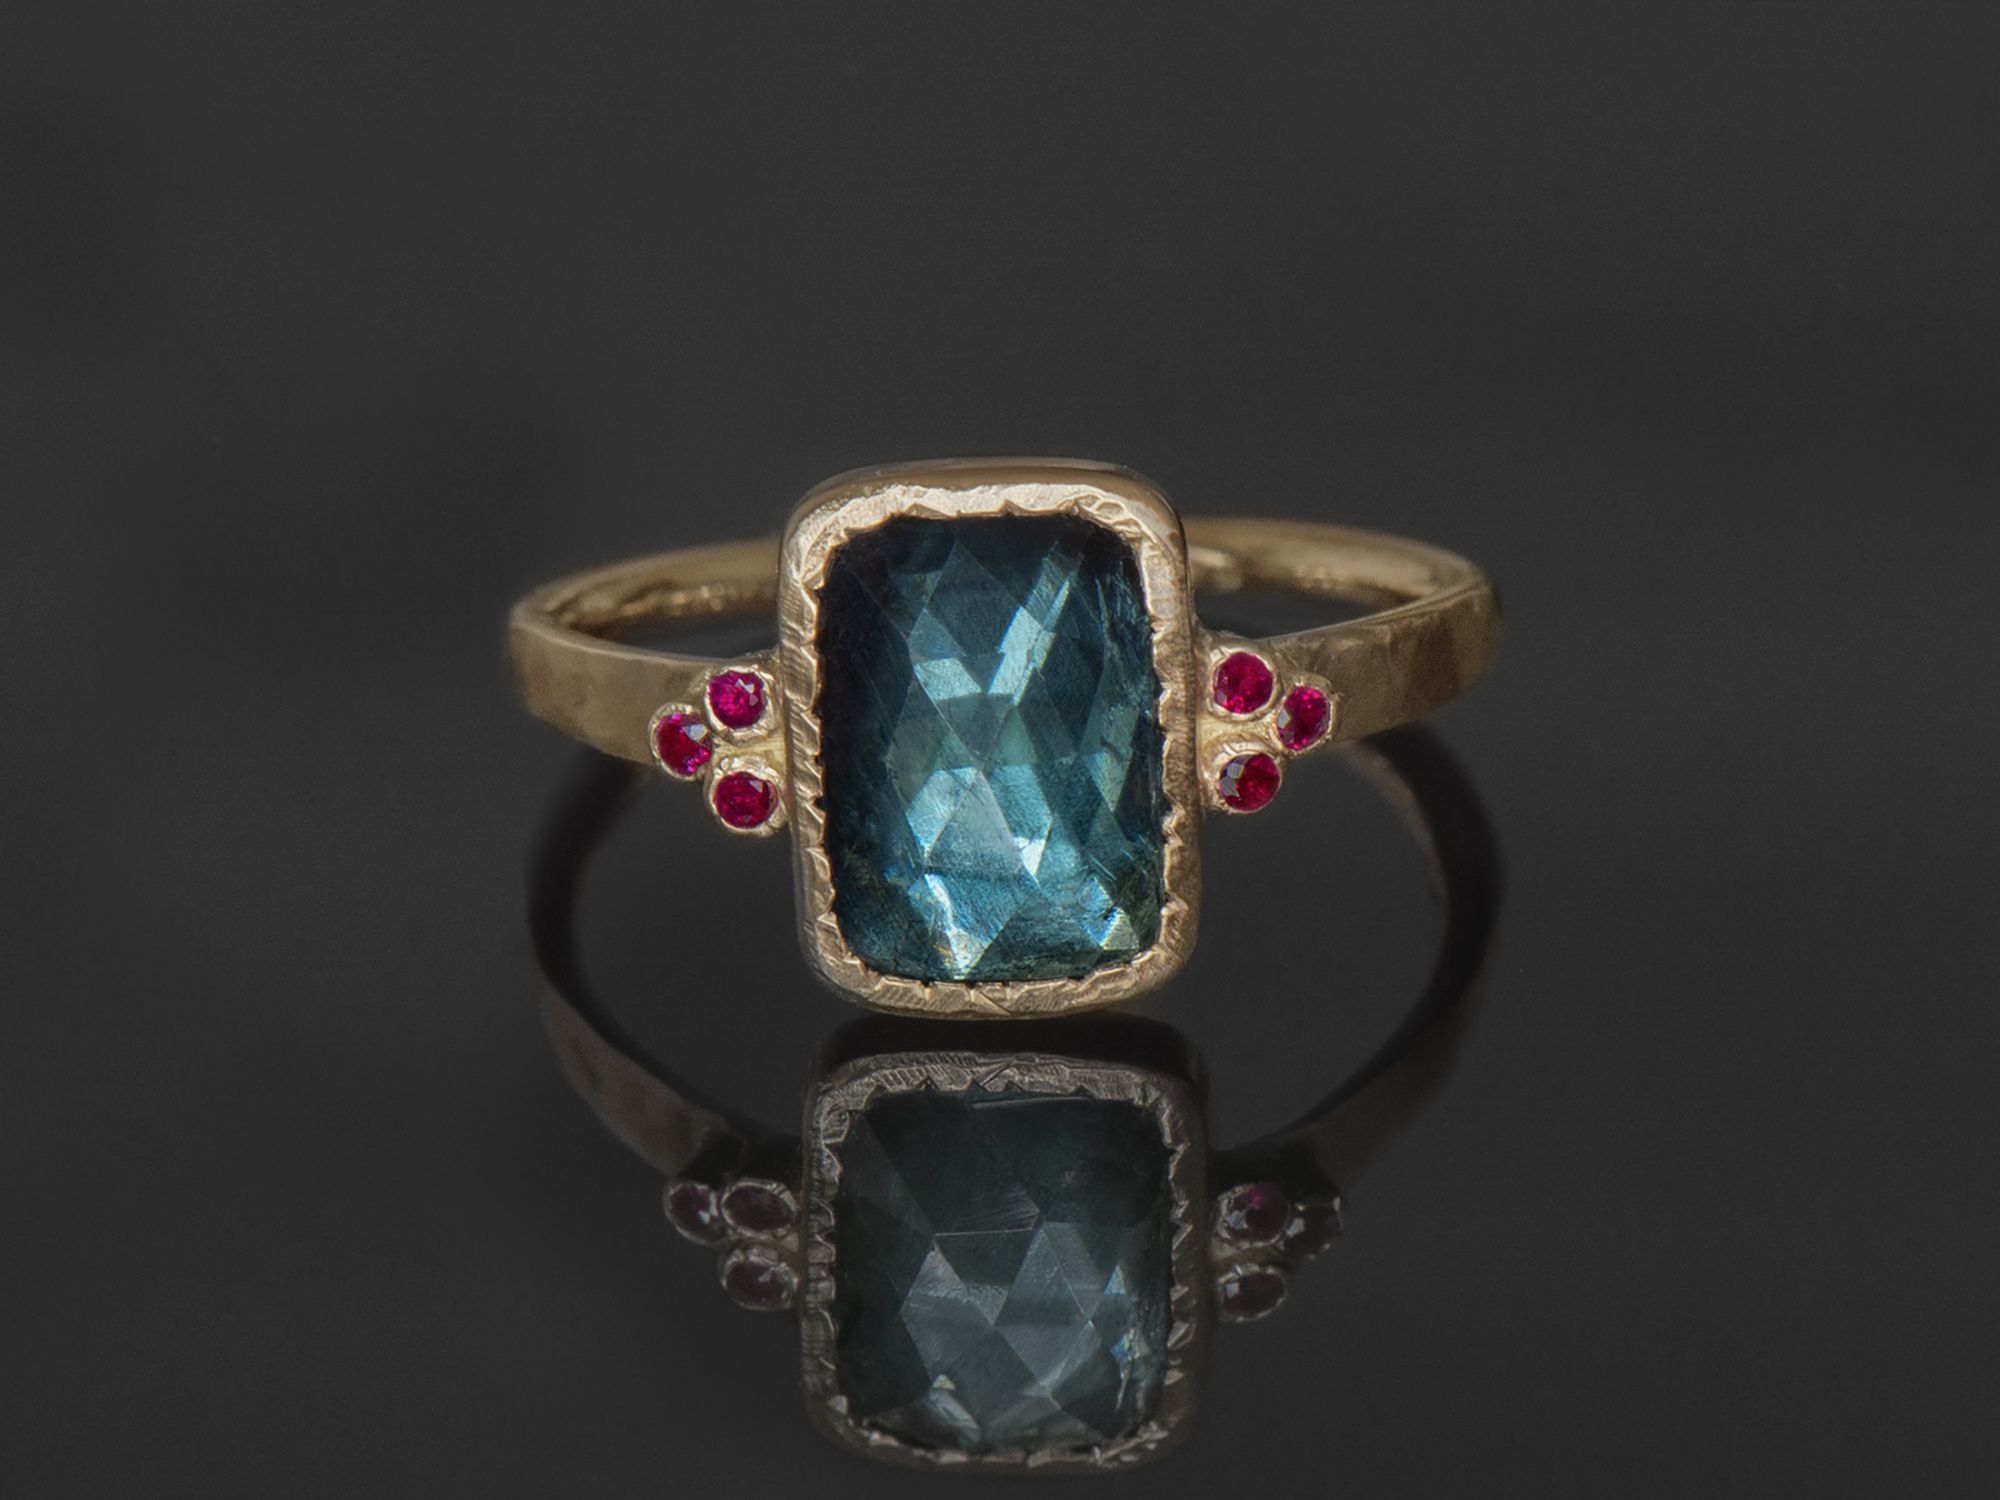 Ruby Queen yellow gold and 2,02cts green tourmaline ring by Emmanuelle Zysman